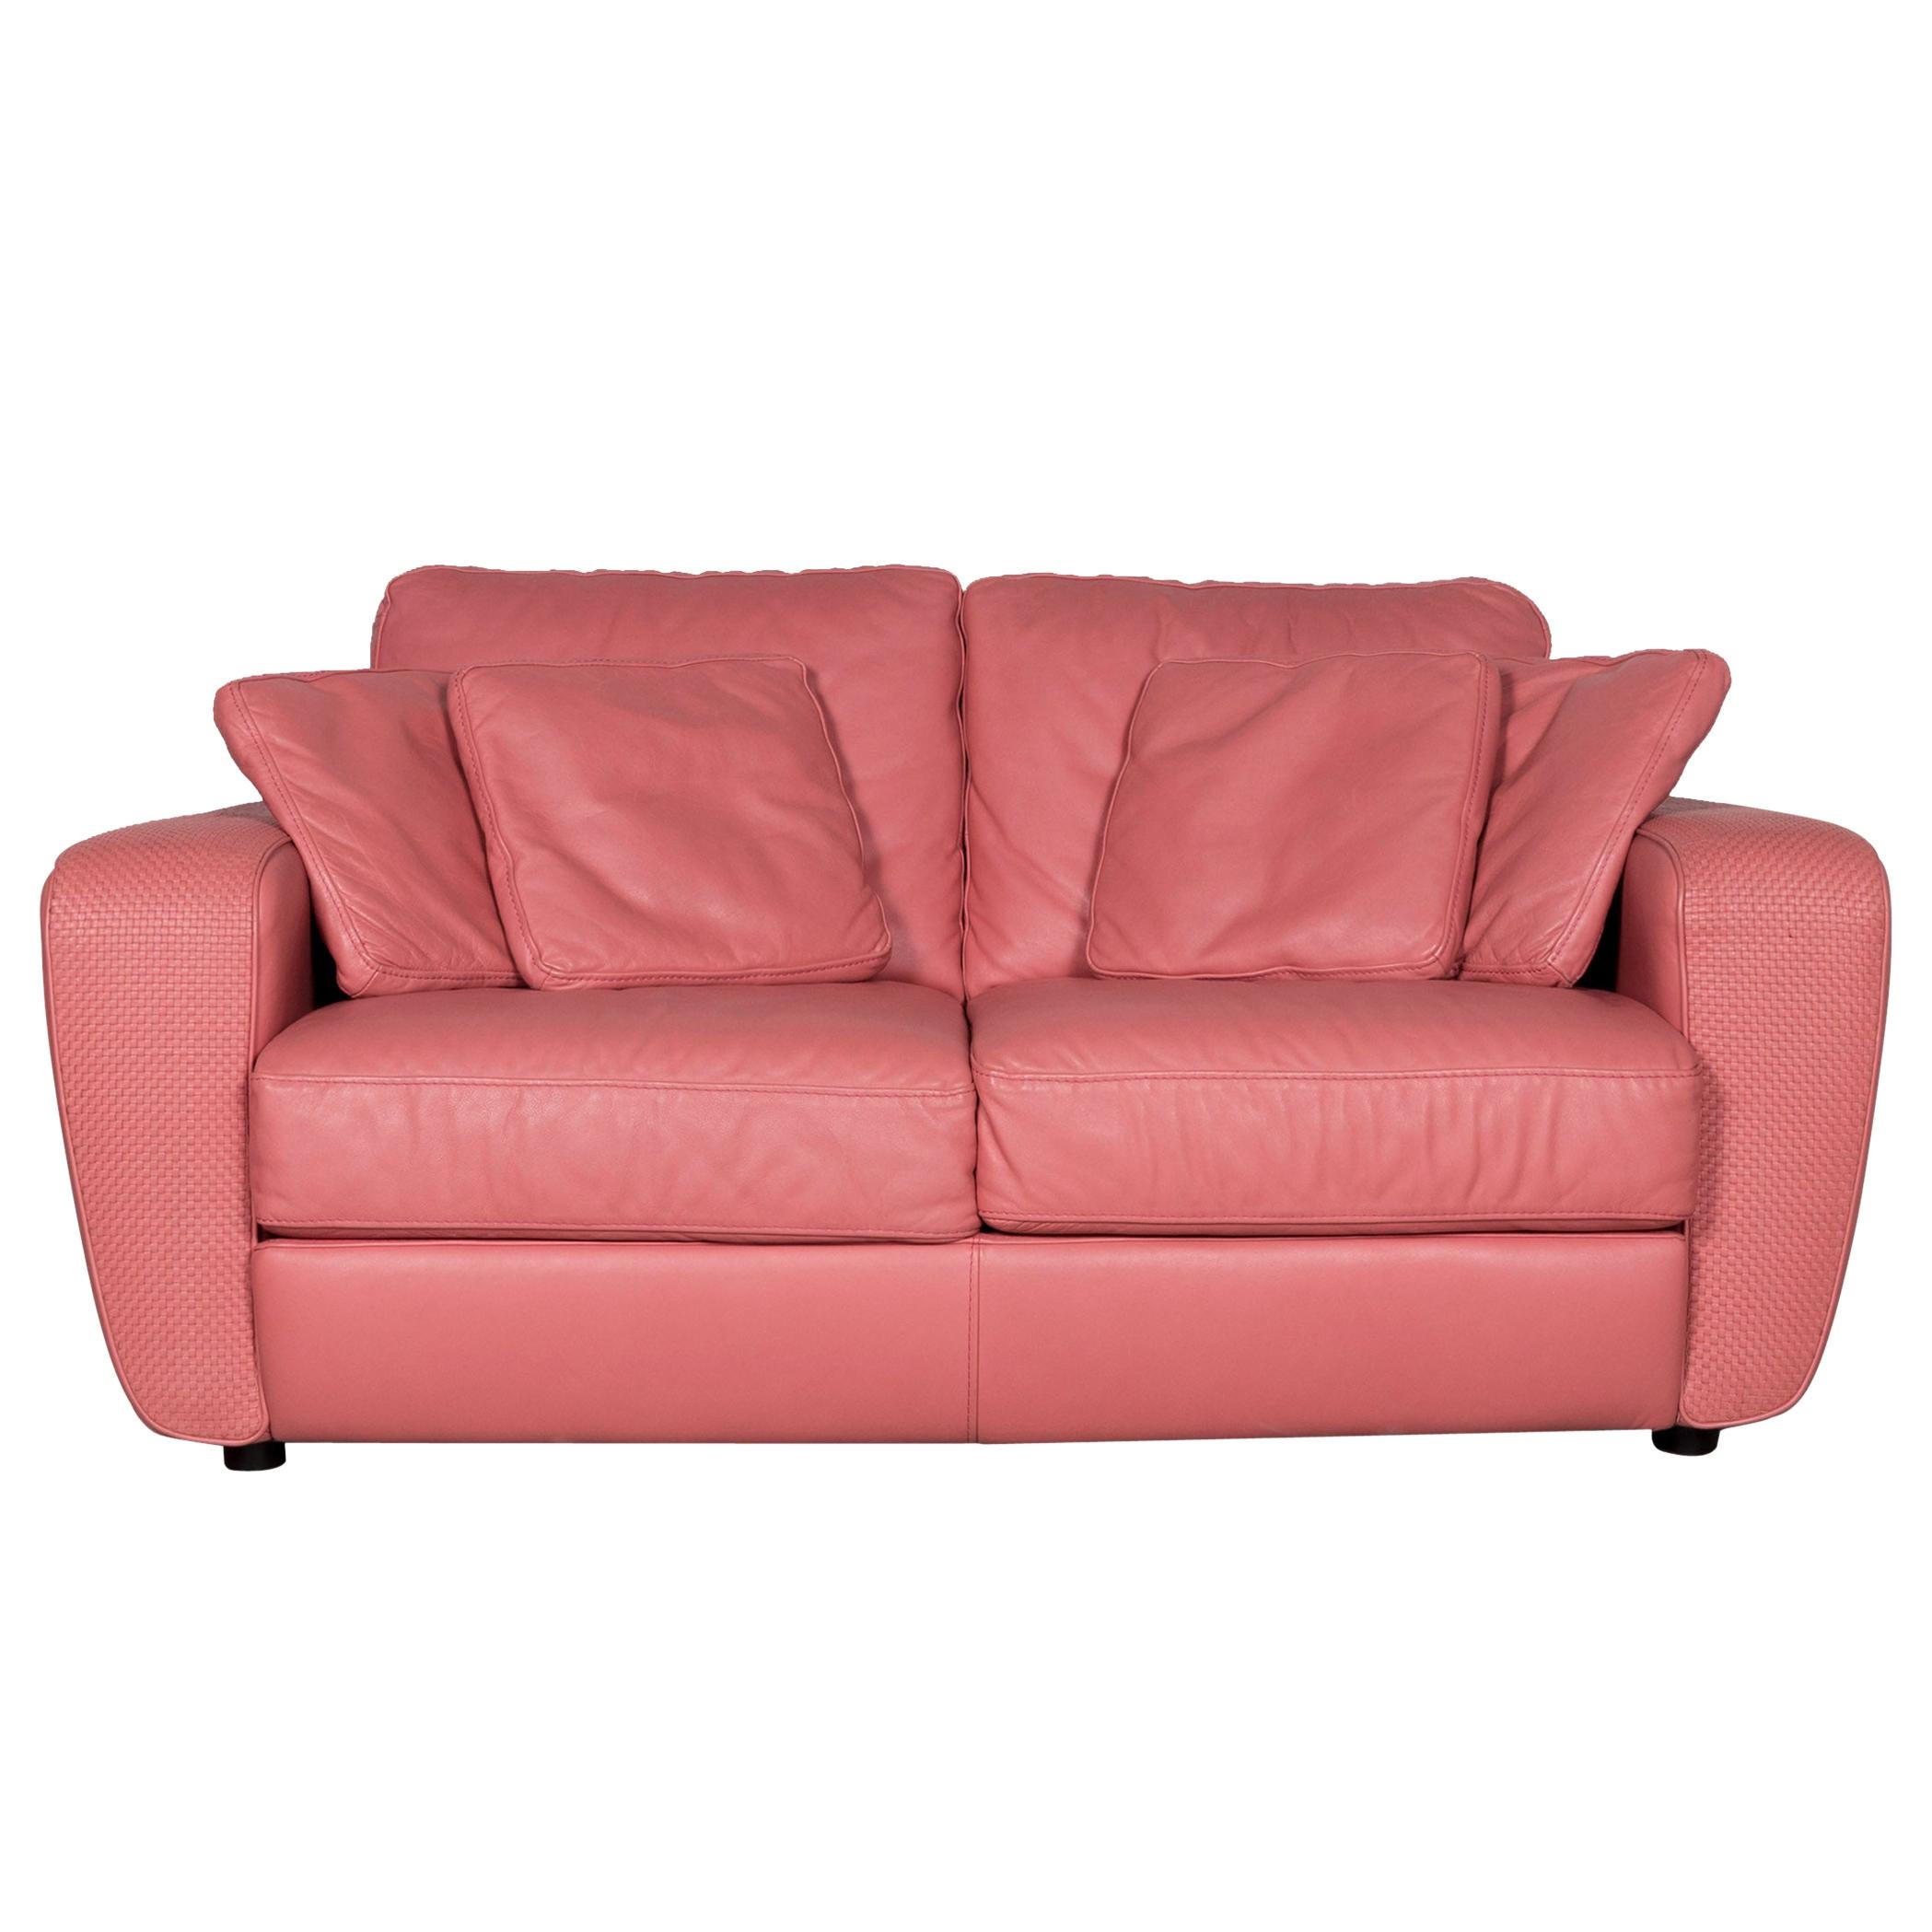 Natuzzi Designer Leather Sofa Red Pink Real Leather Two-Seat Couch